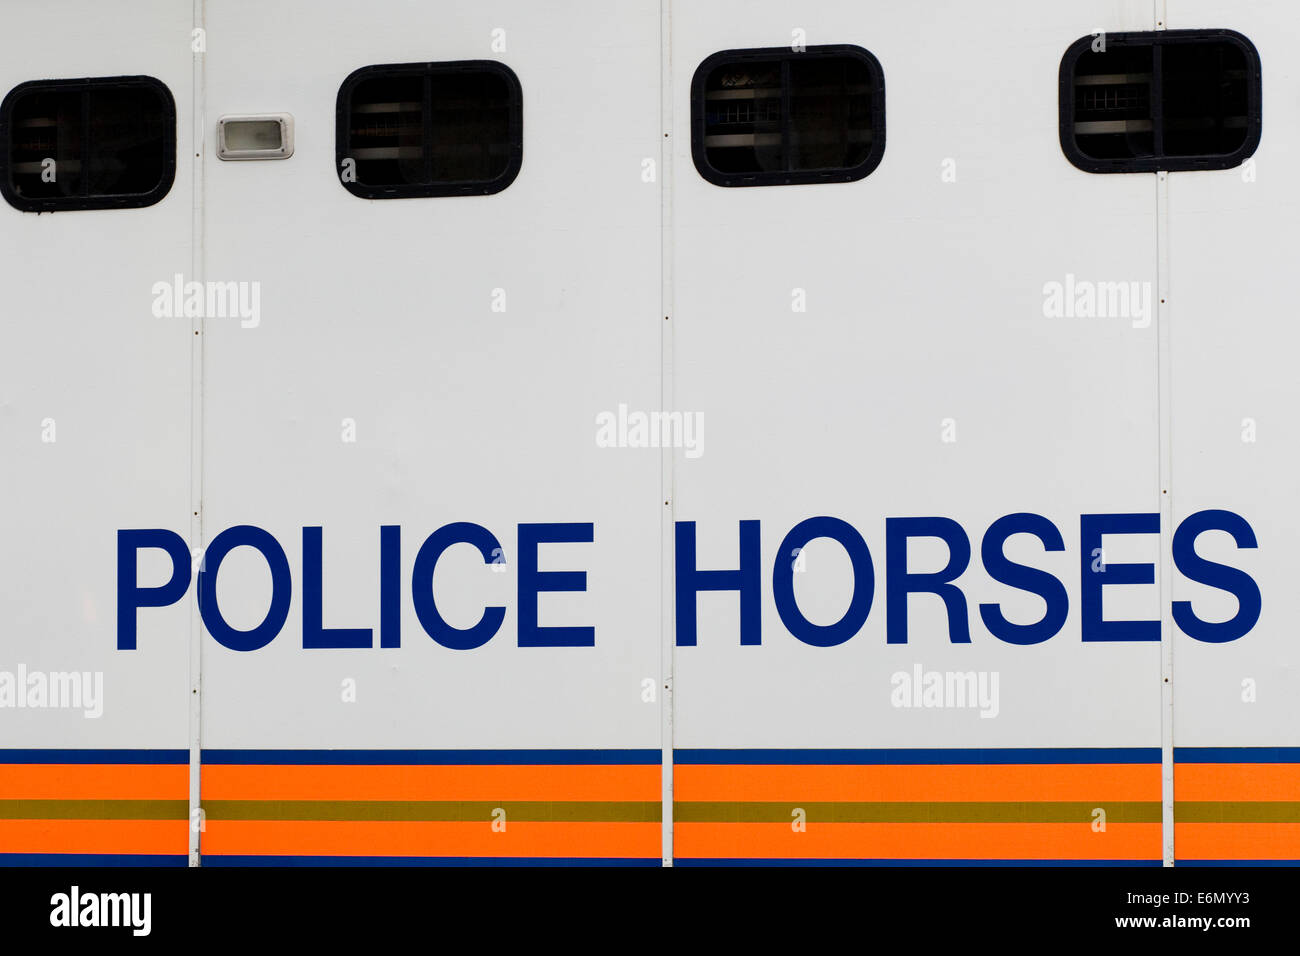 Mercedes Iveco Horsebox transporting Police Horses in London England Stock Photo